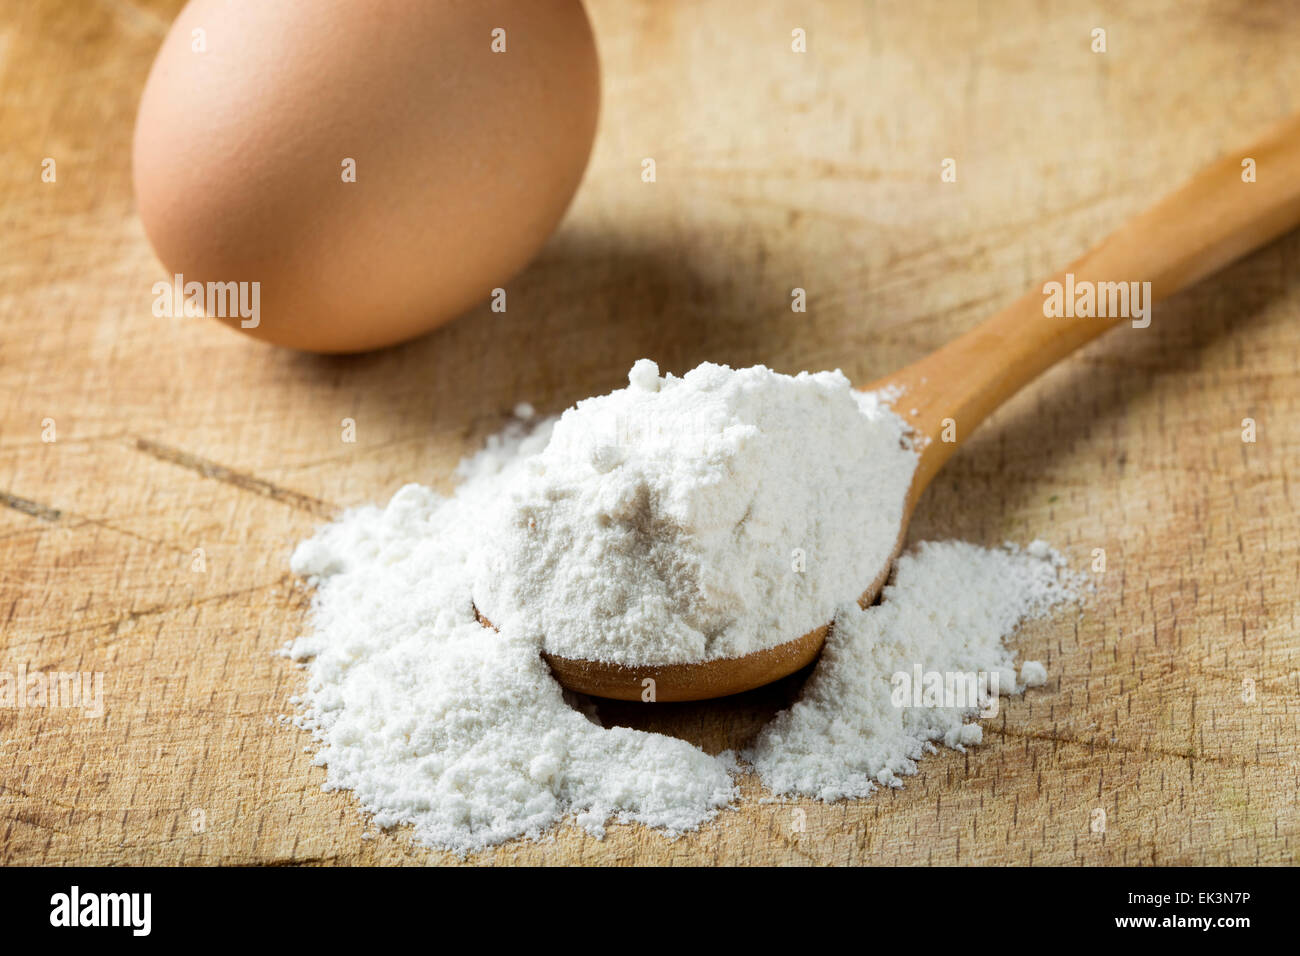 Flour and eggs on a wooden board Stock Photo